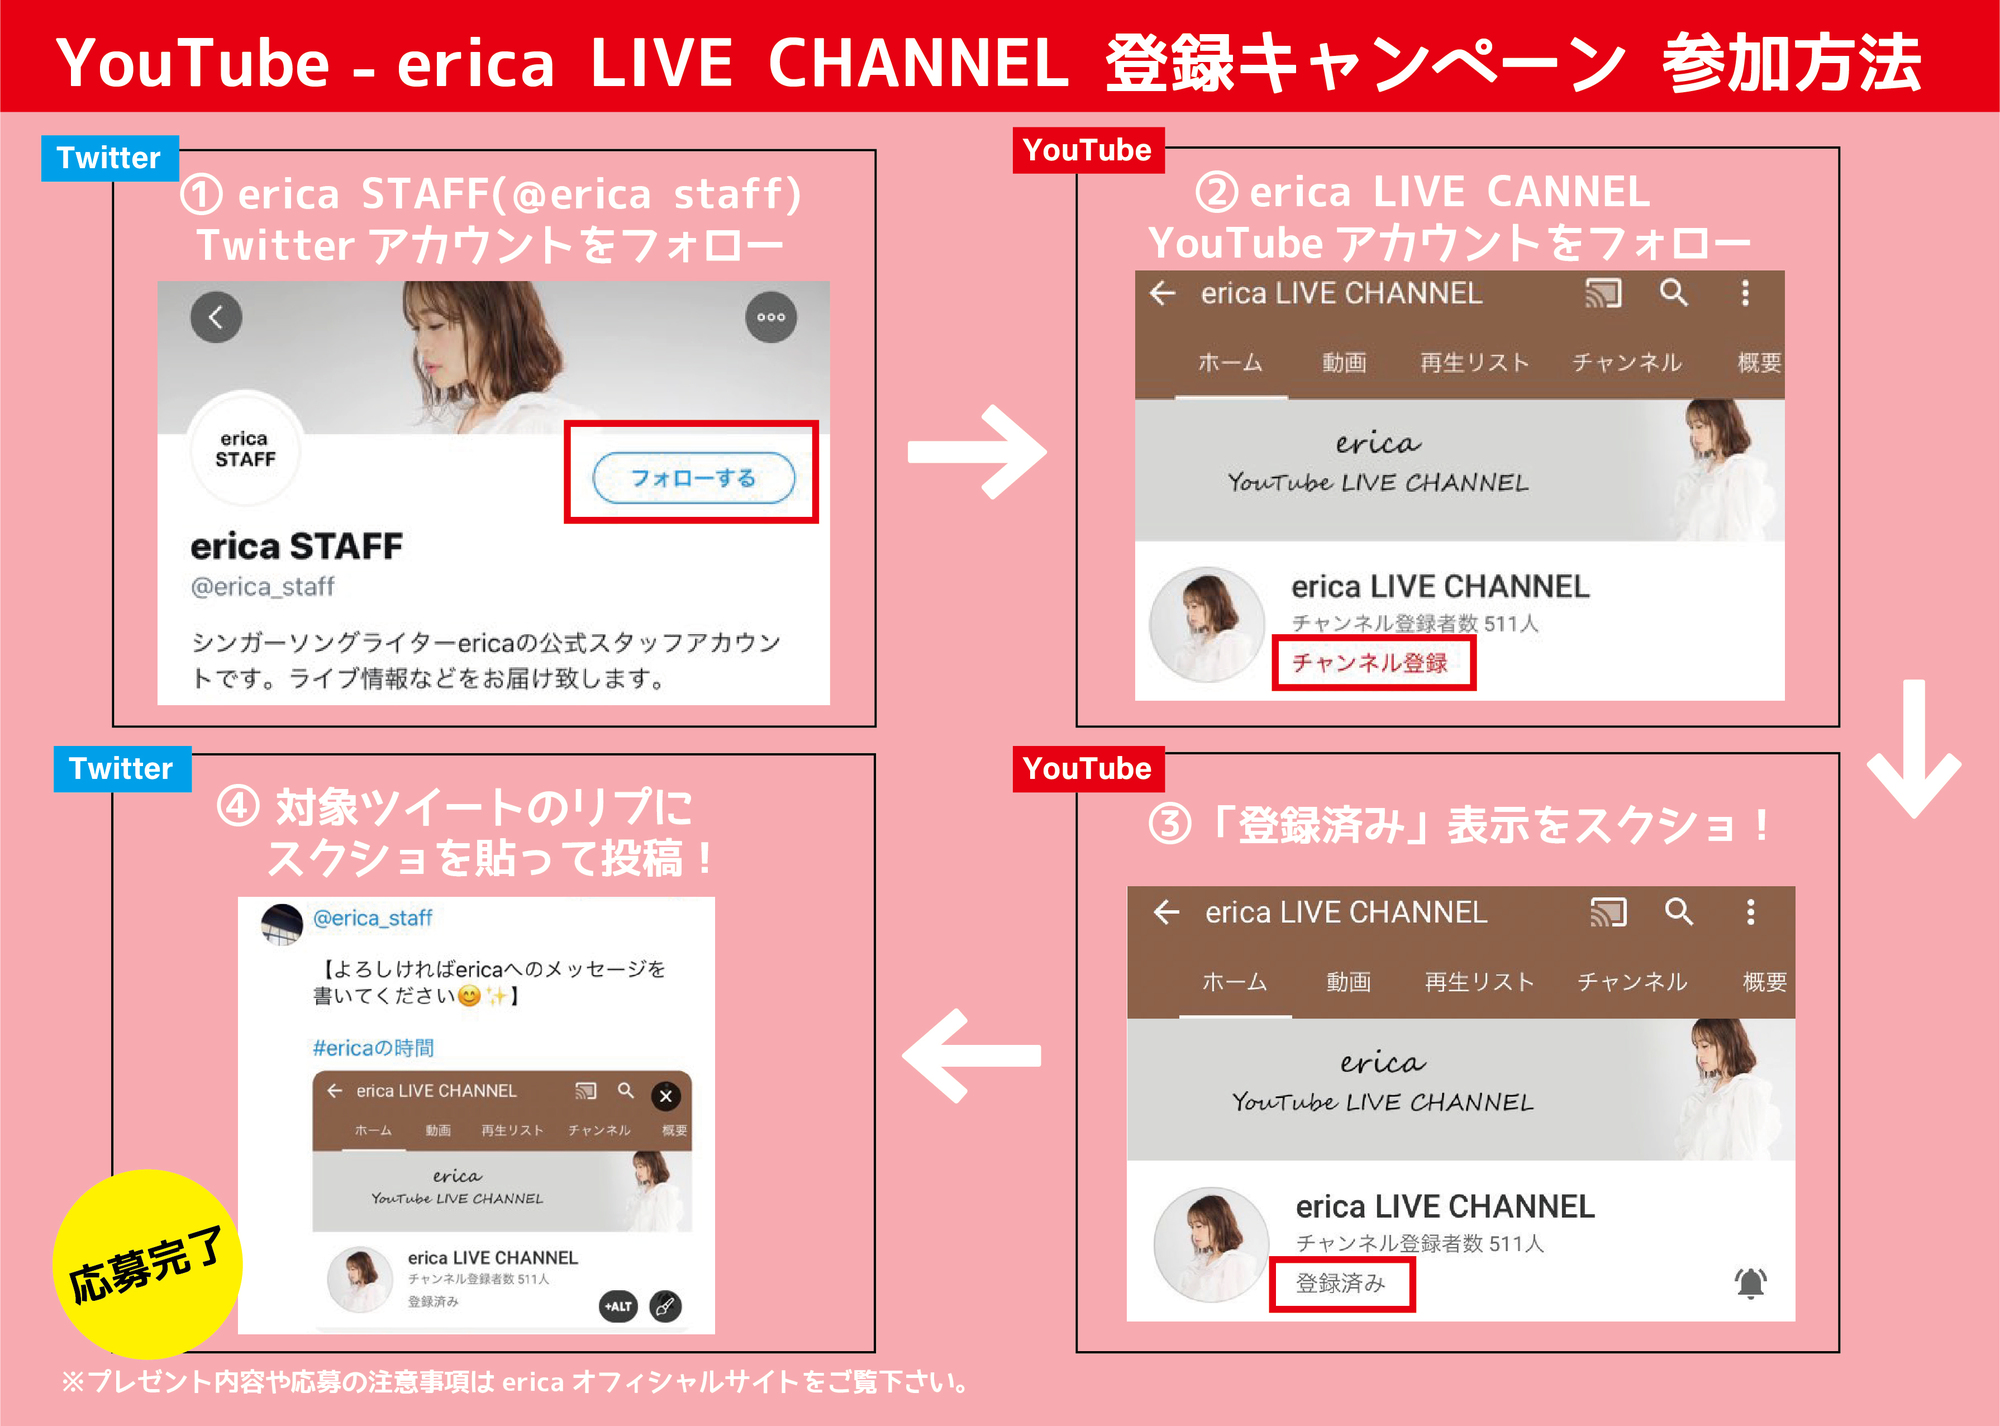 Youtube Erica Liveチャンネル登録キャンペーン決定 Erica Official Web Site